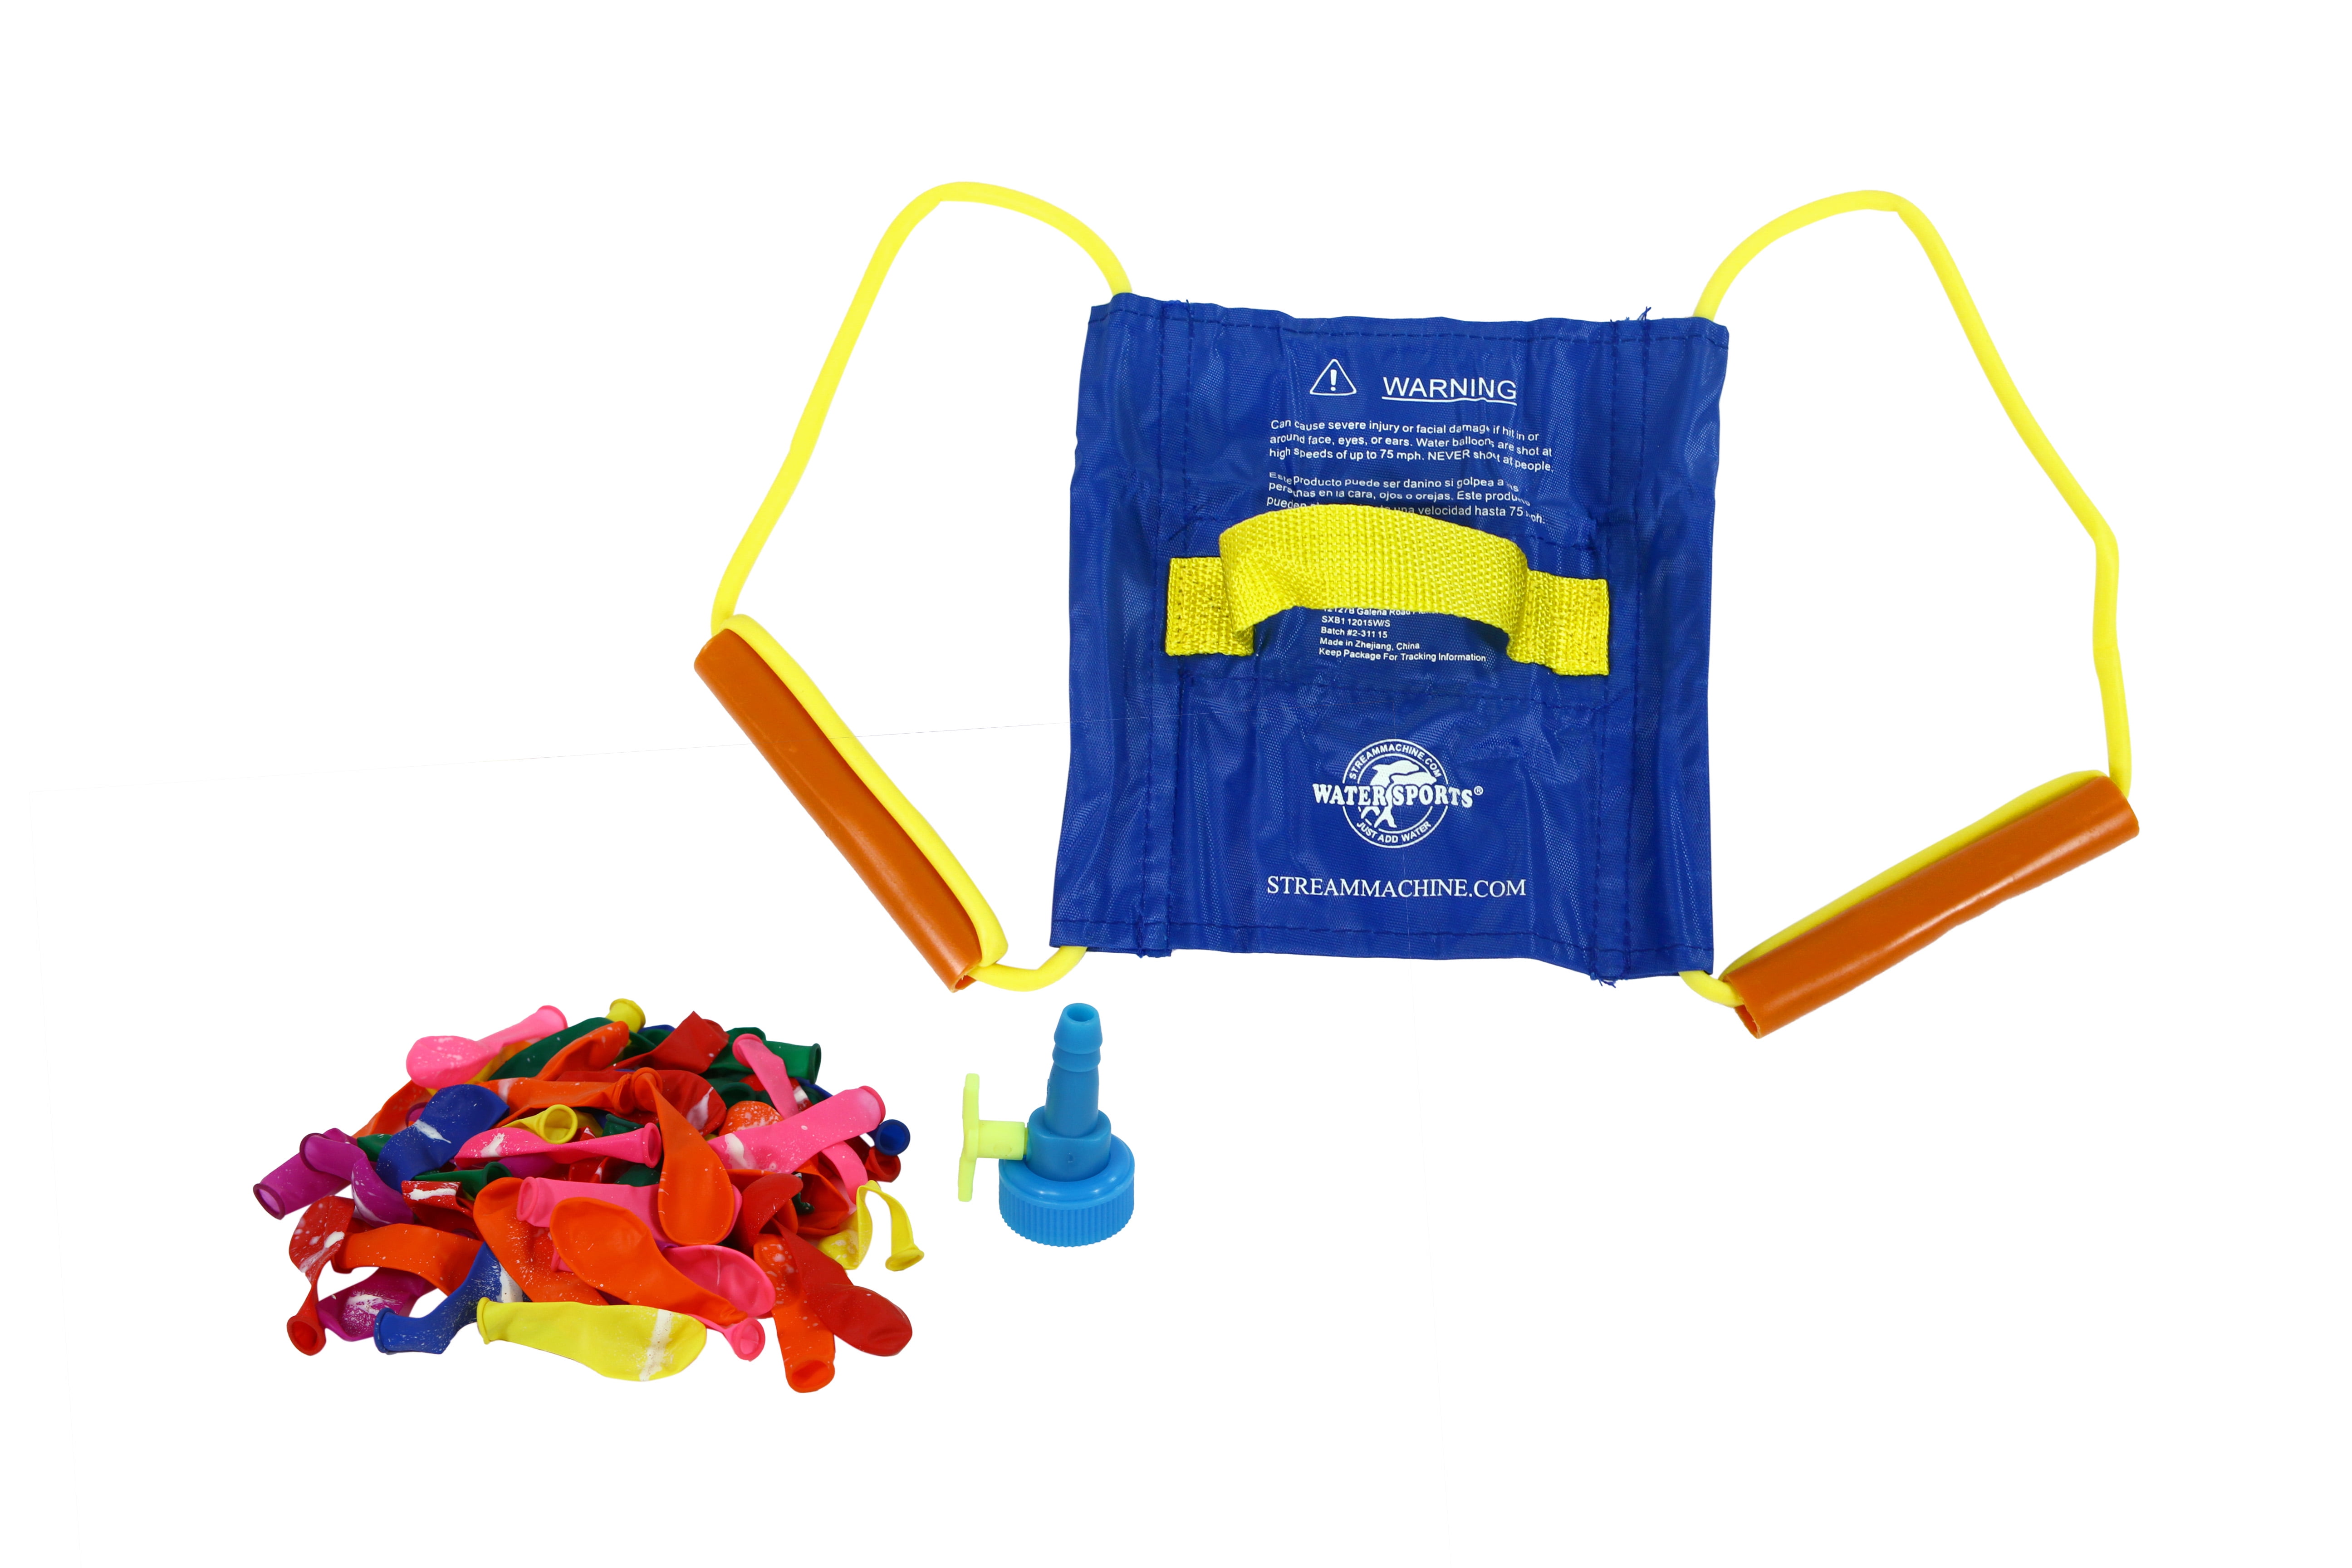 1WATER BOMB SLING SHOT SETS outdoor wet toy pool swim balloon shooter balloons 